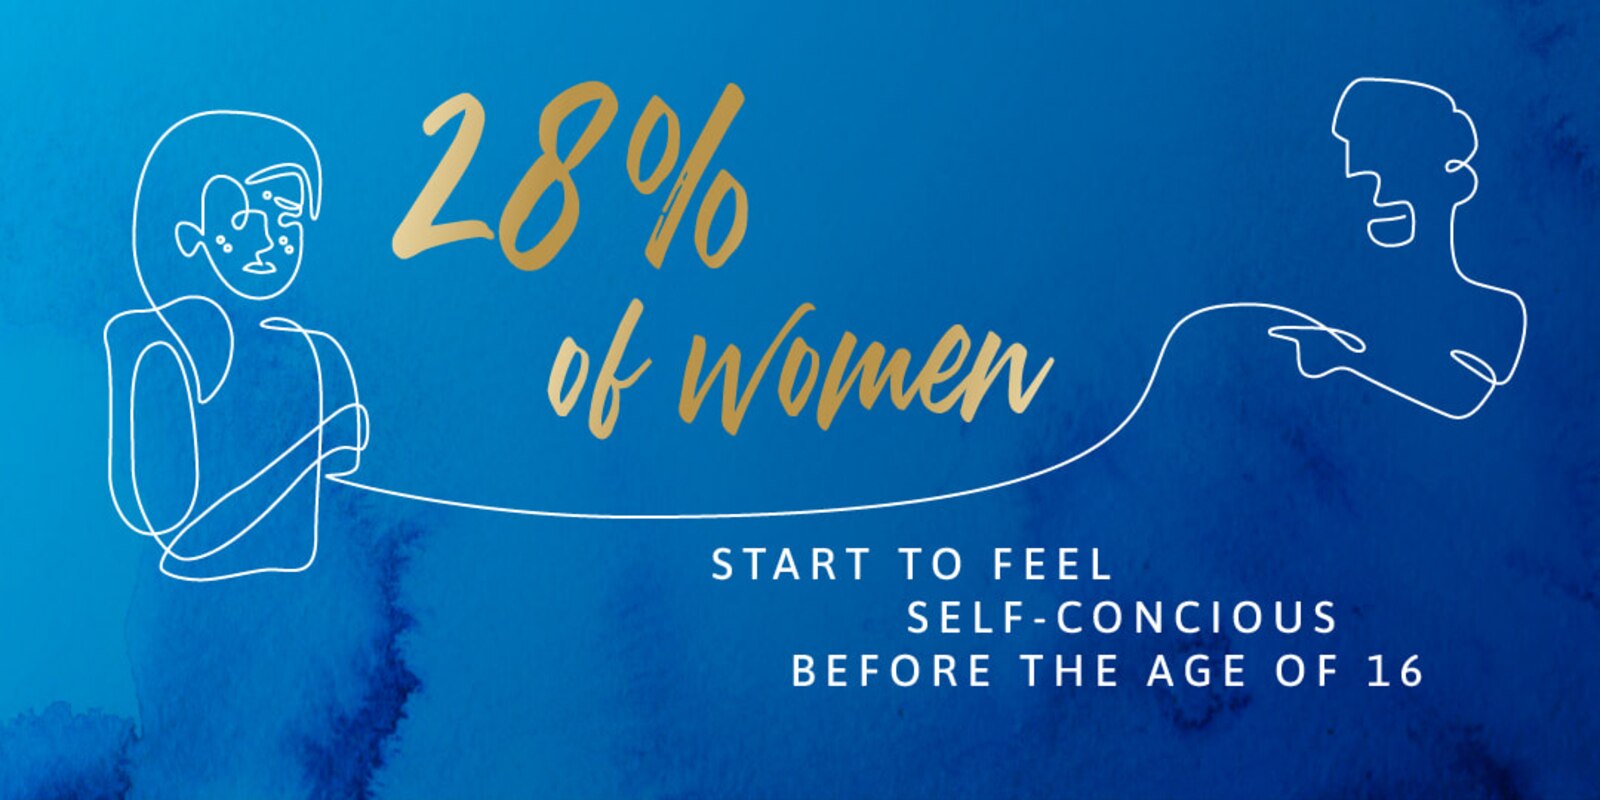 28% of women start to feel self-concious before the age of 16